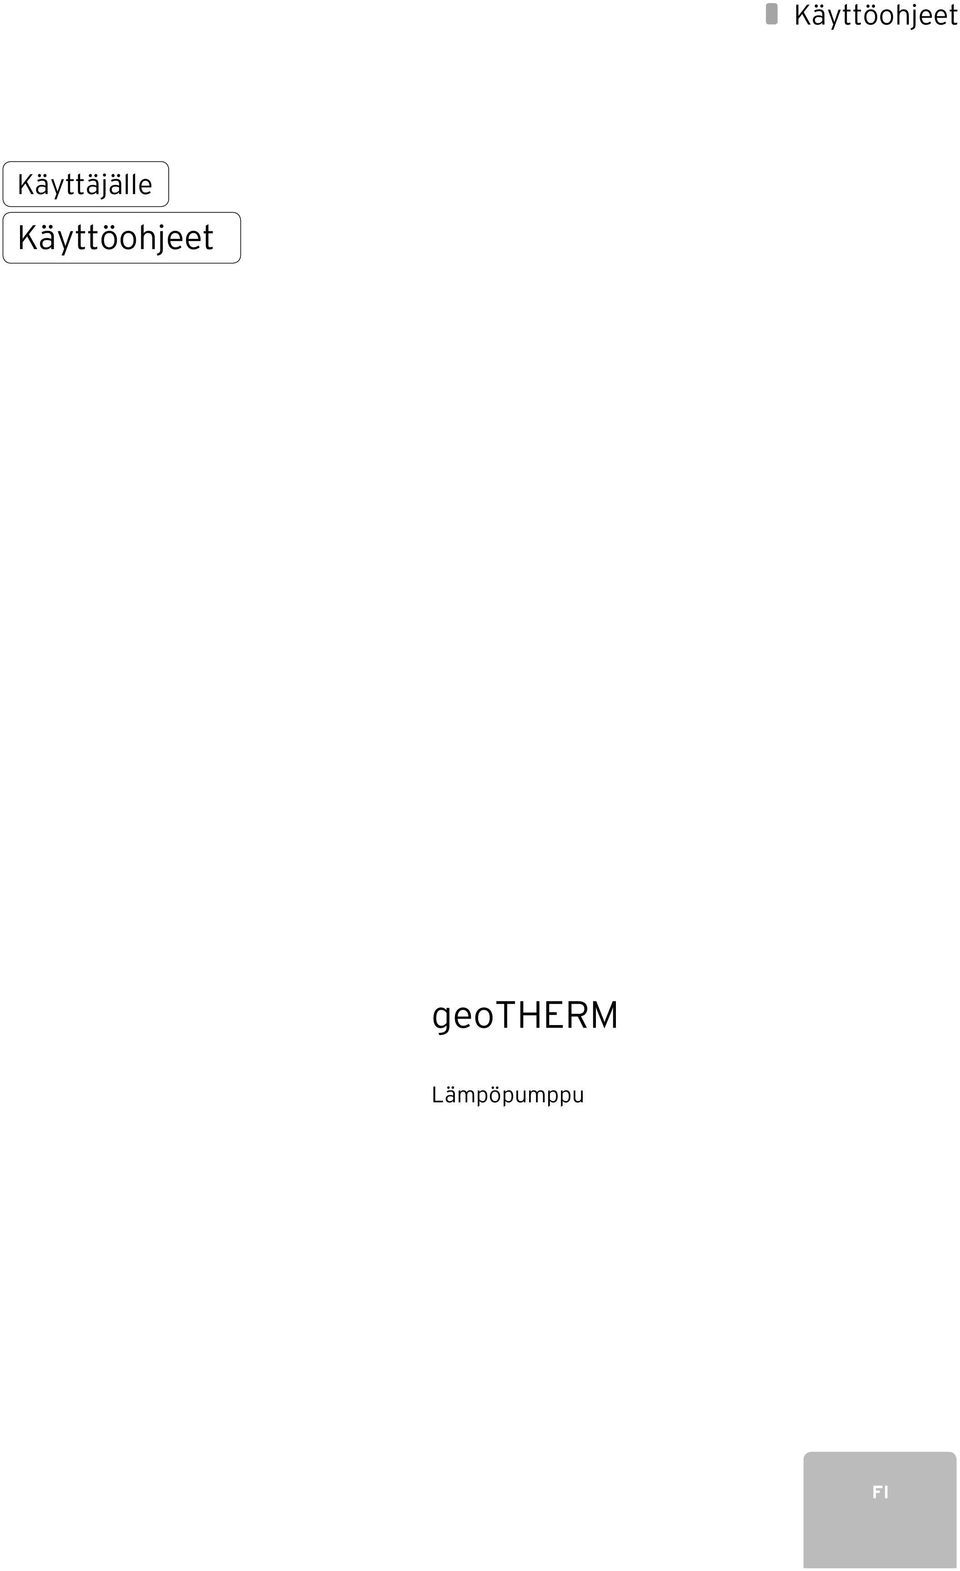 geotherm